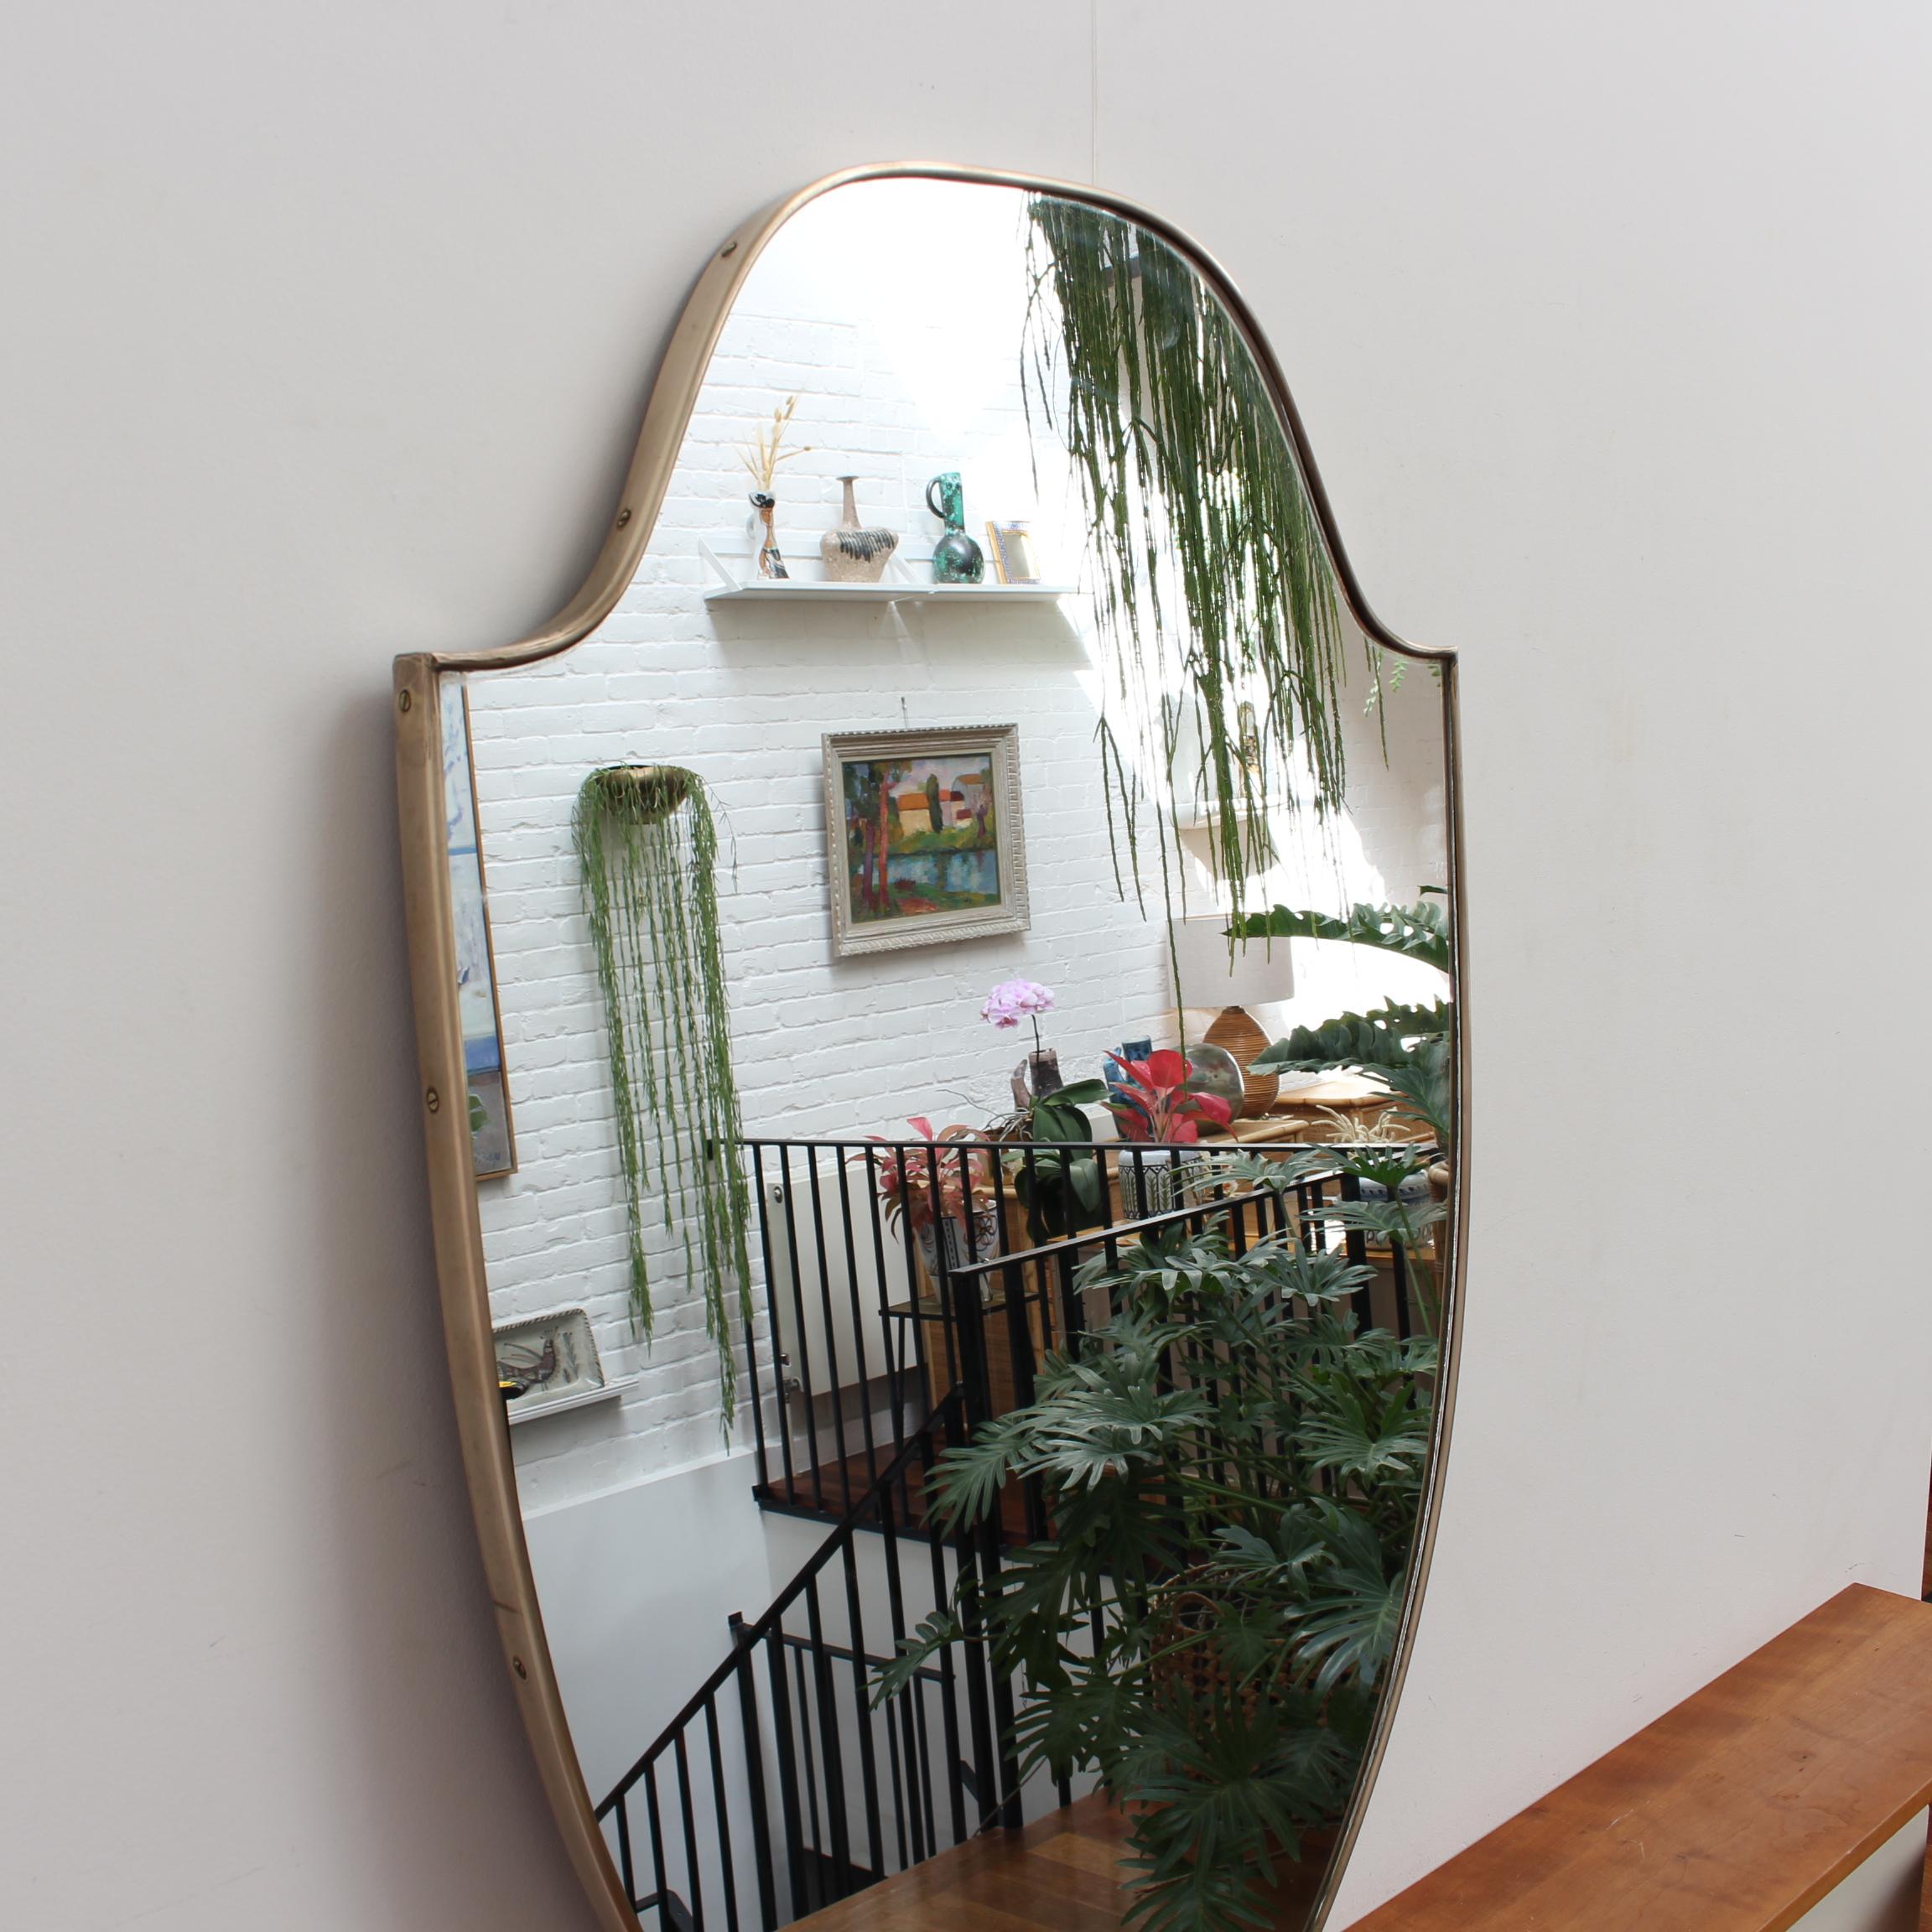 Midcentury Italian wall mirror with brass frame (circa 1950s). The mirror is classically-shaped and distinctive in a Modern style. It is in very good overall condition. A beautiful patina develops on the brass frame - this one has been recently